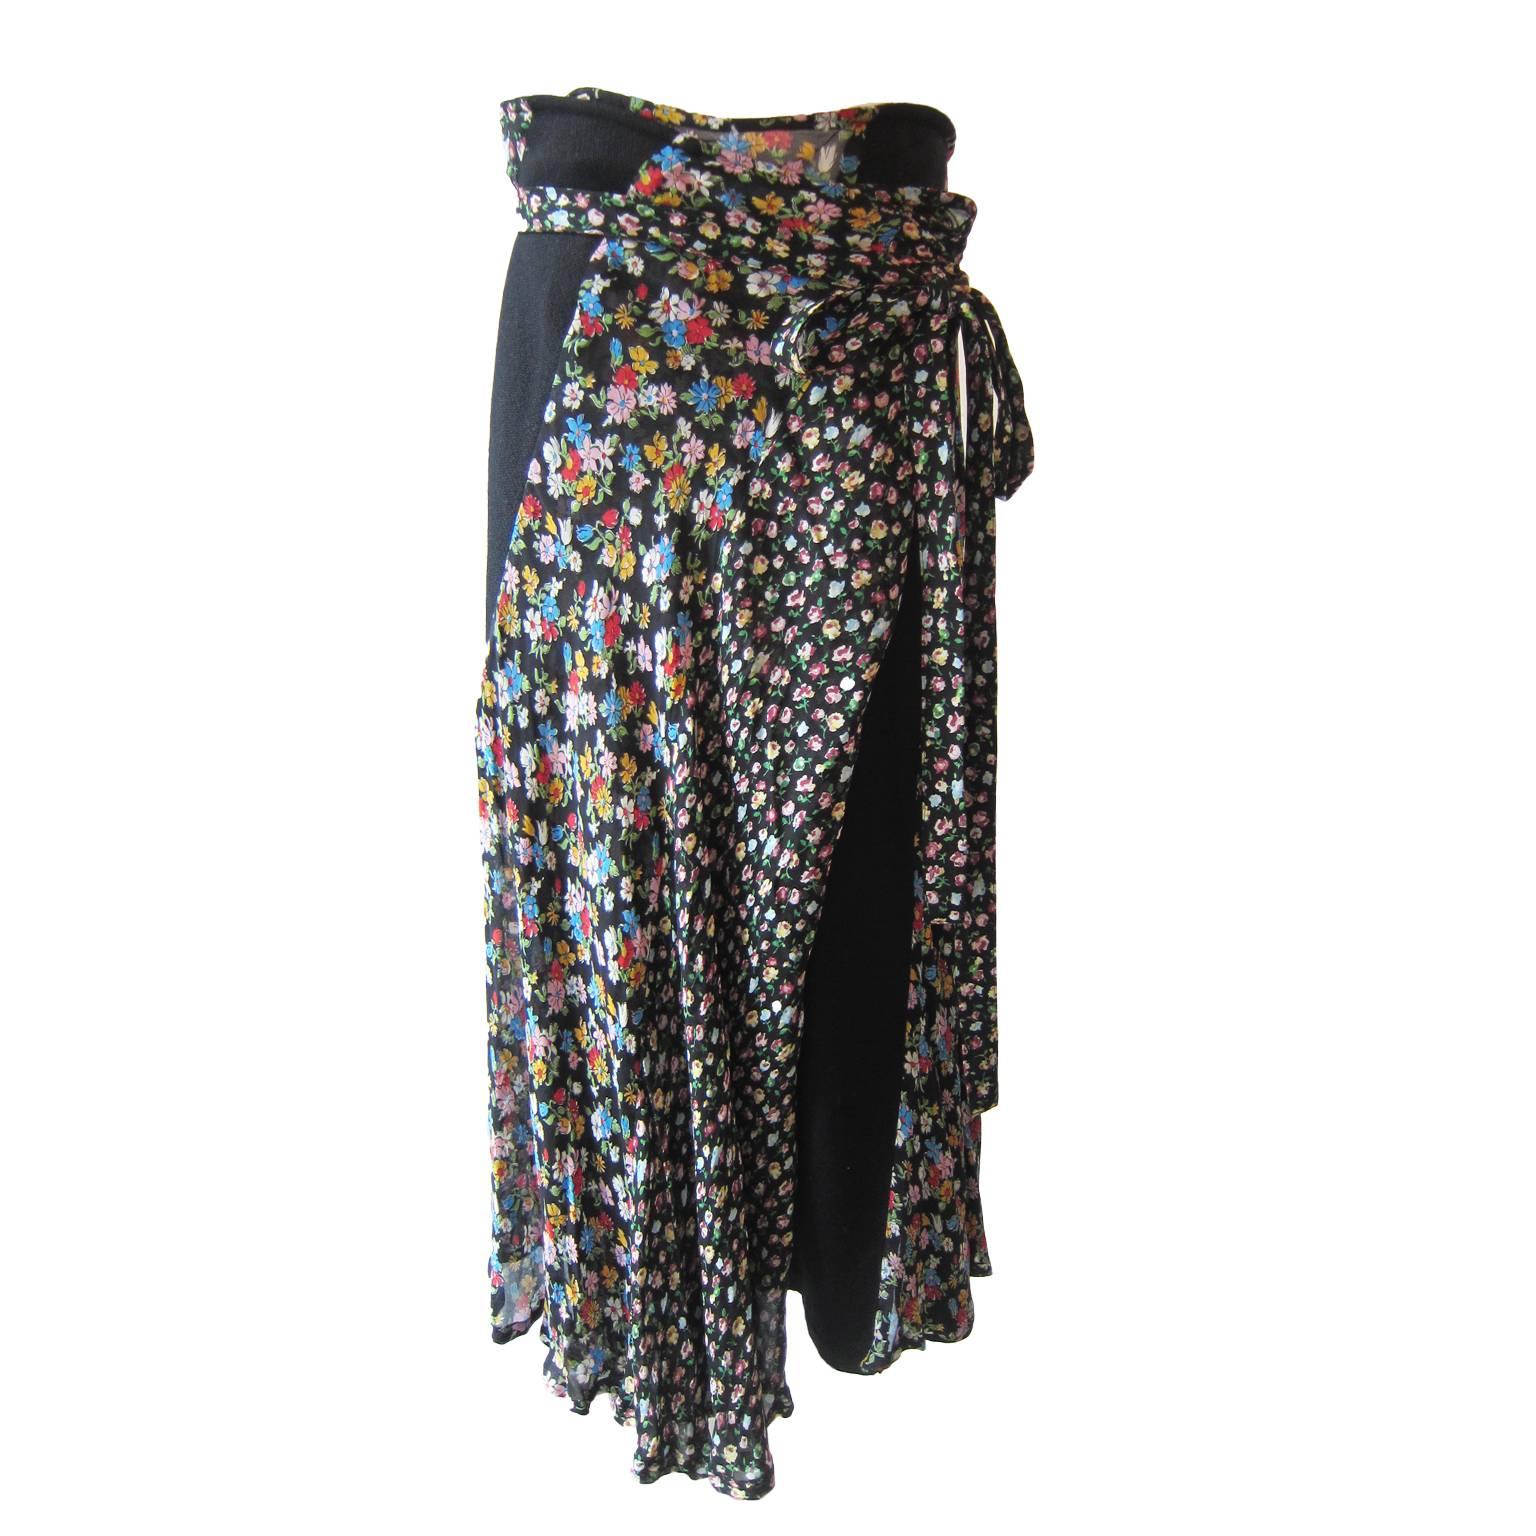 Comme des Garcons tricot line flower rap skirt from AD 2005. Diagonally mixed  
bias cut rayon flower materials mixed with black thin wool.
Size:  M
Measurements : 
Length : 76 cm

